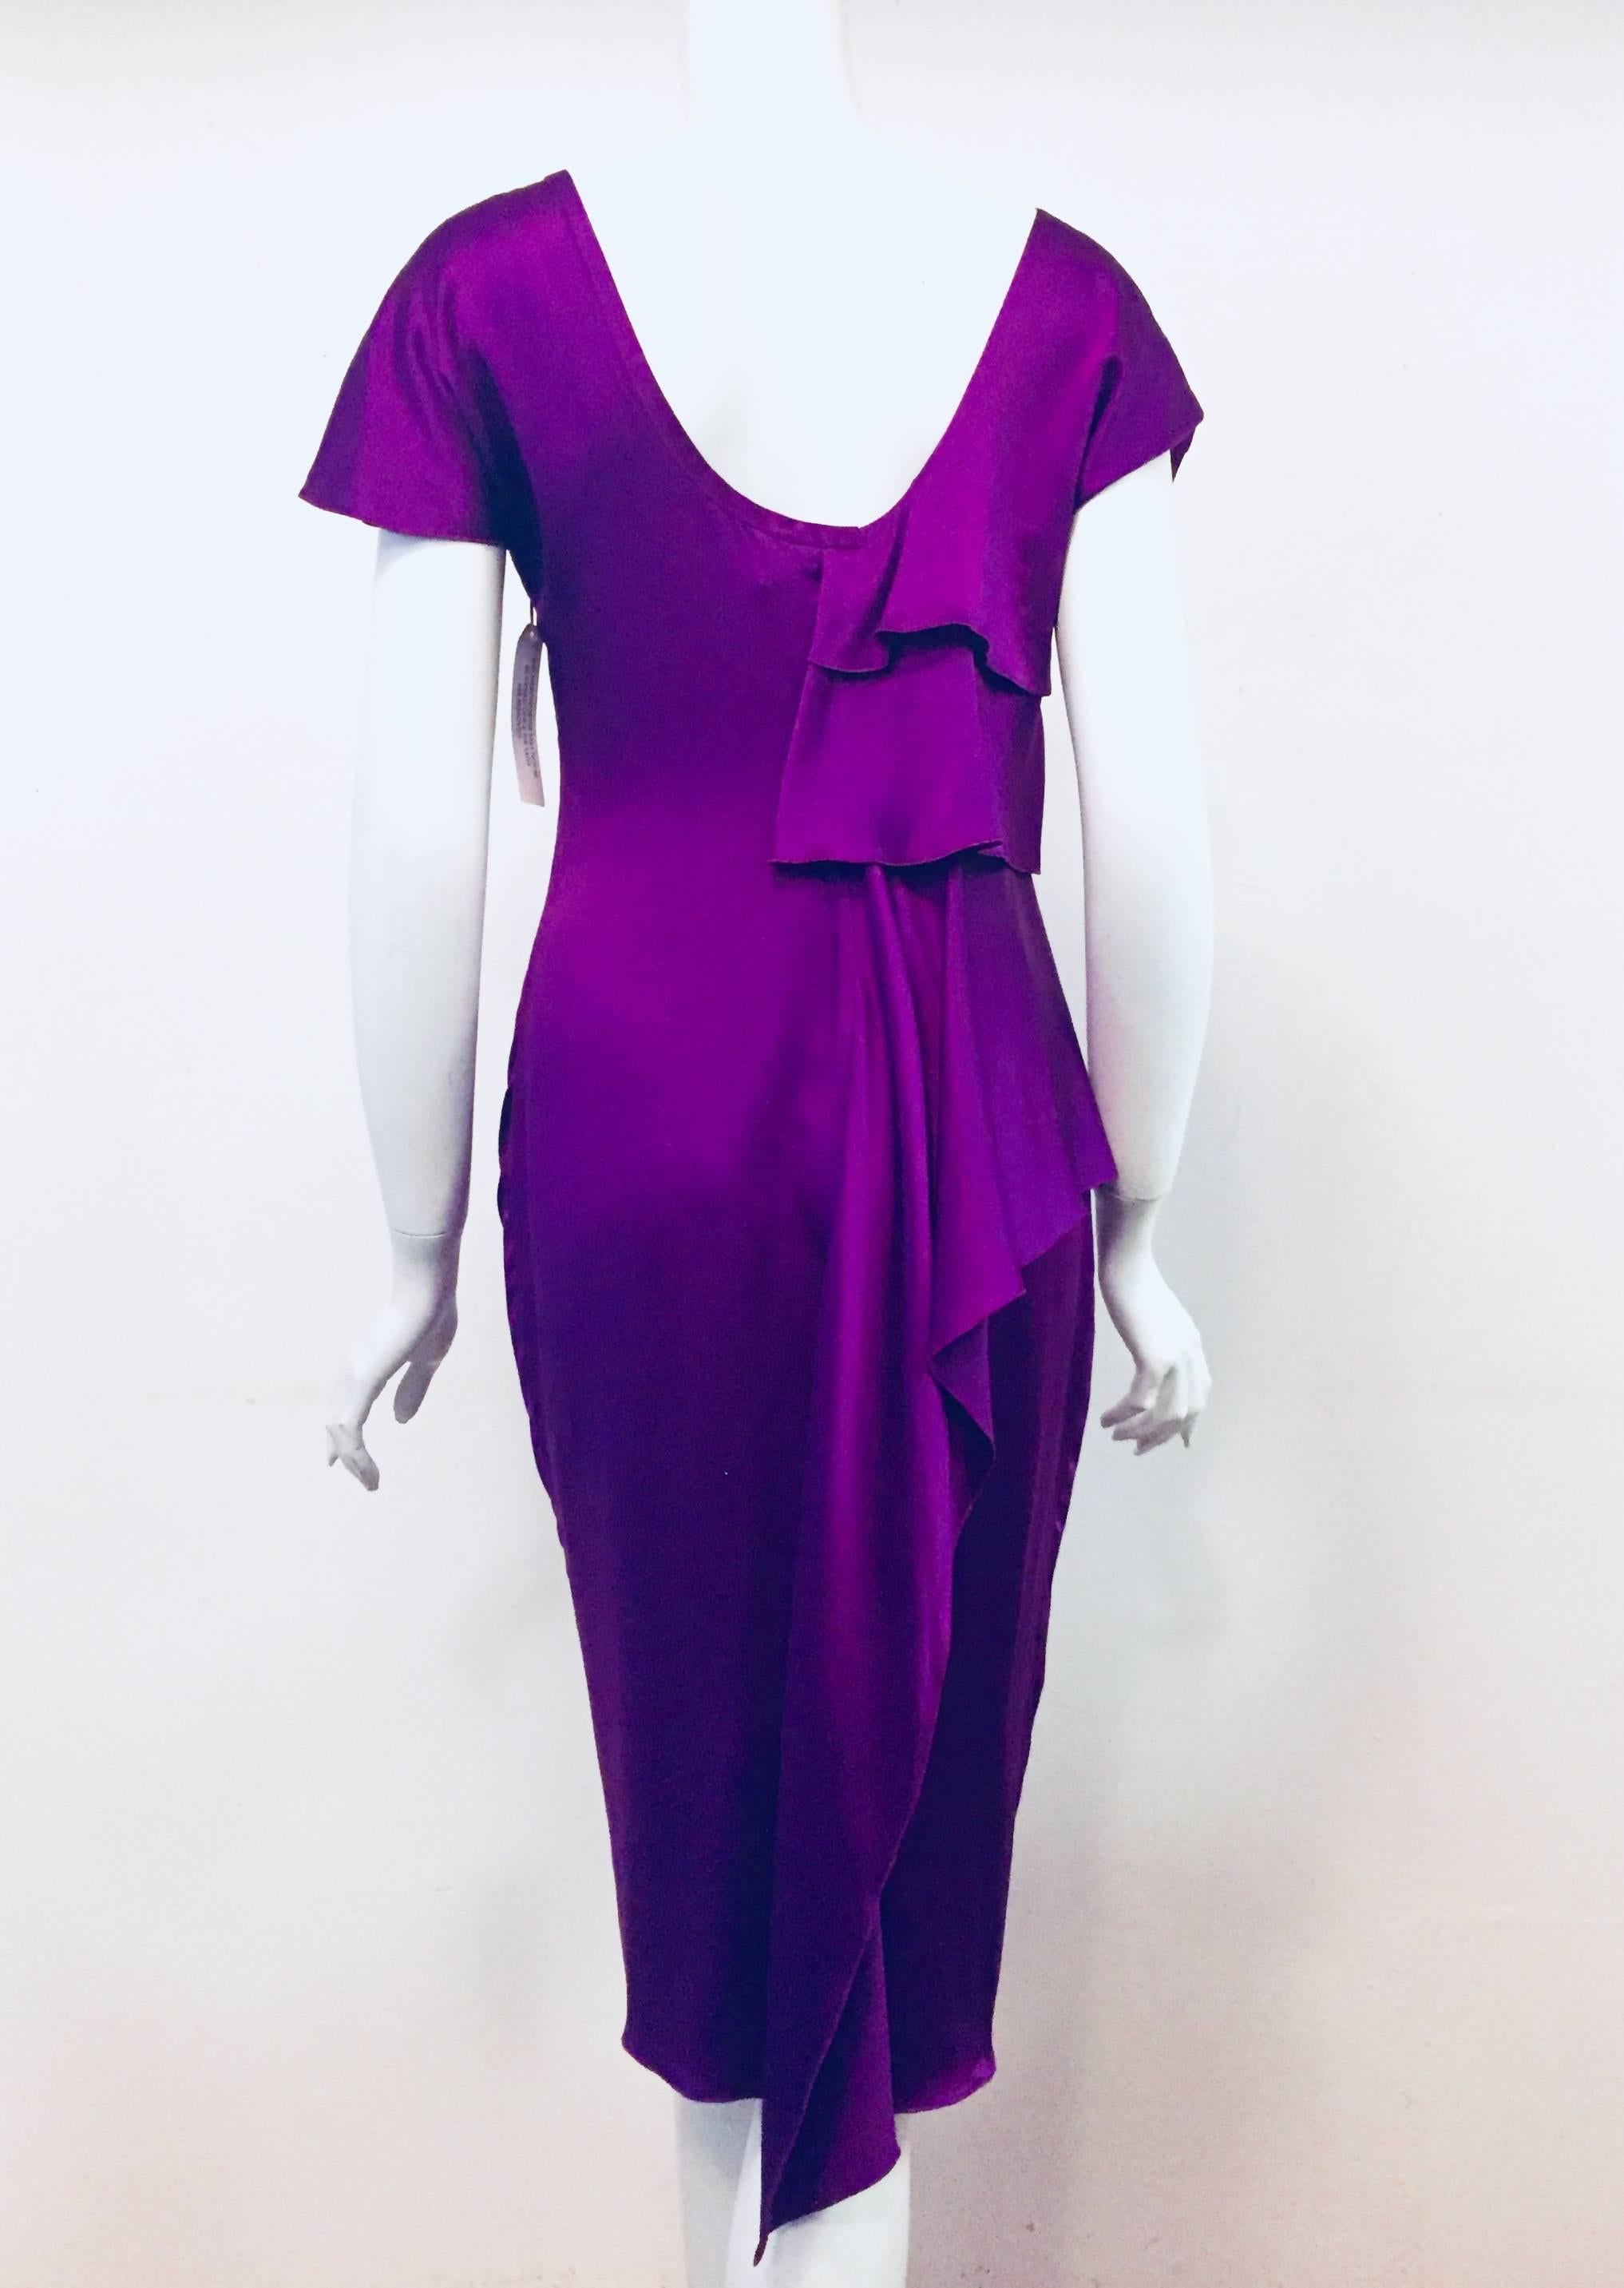 Versace was celebrated for his glamorous designs and impeccable craftsmanship which still continues with the house of Versace. This purple silk draped dress is cut in a figure flattering silhouette featuring short sleeves that convert into ruffles